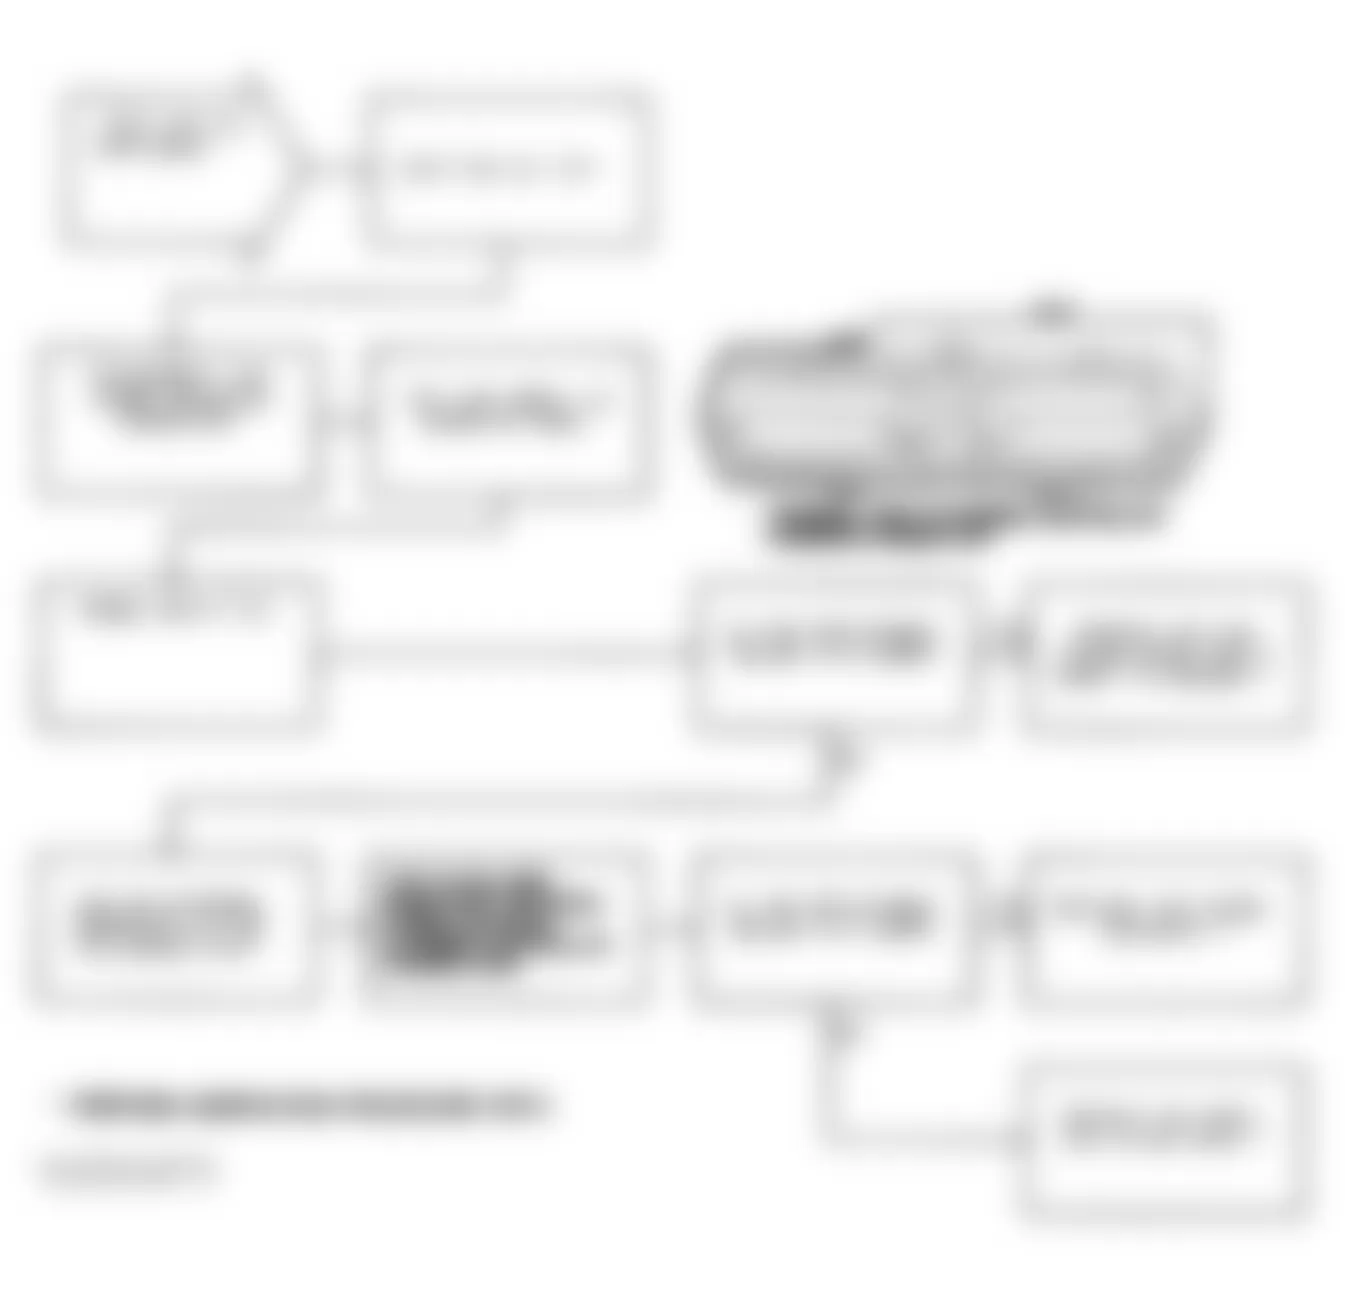 Chrysler New Yorker Fifth Avenue 1991 - Component Locations -  Test DR-21A Code 31: Flowchart (3 of 3)